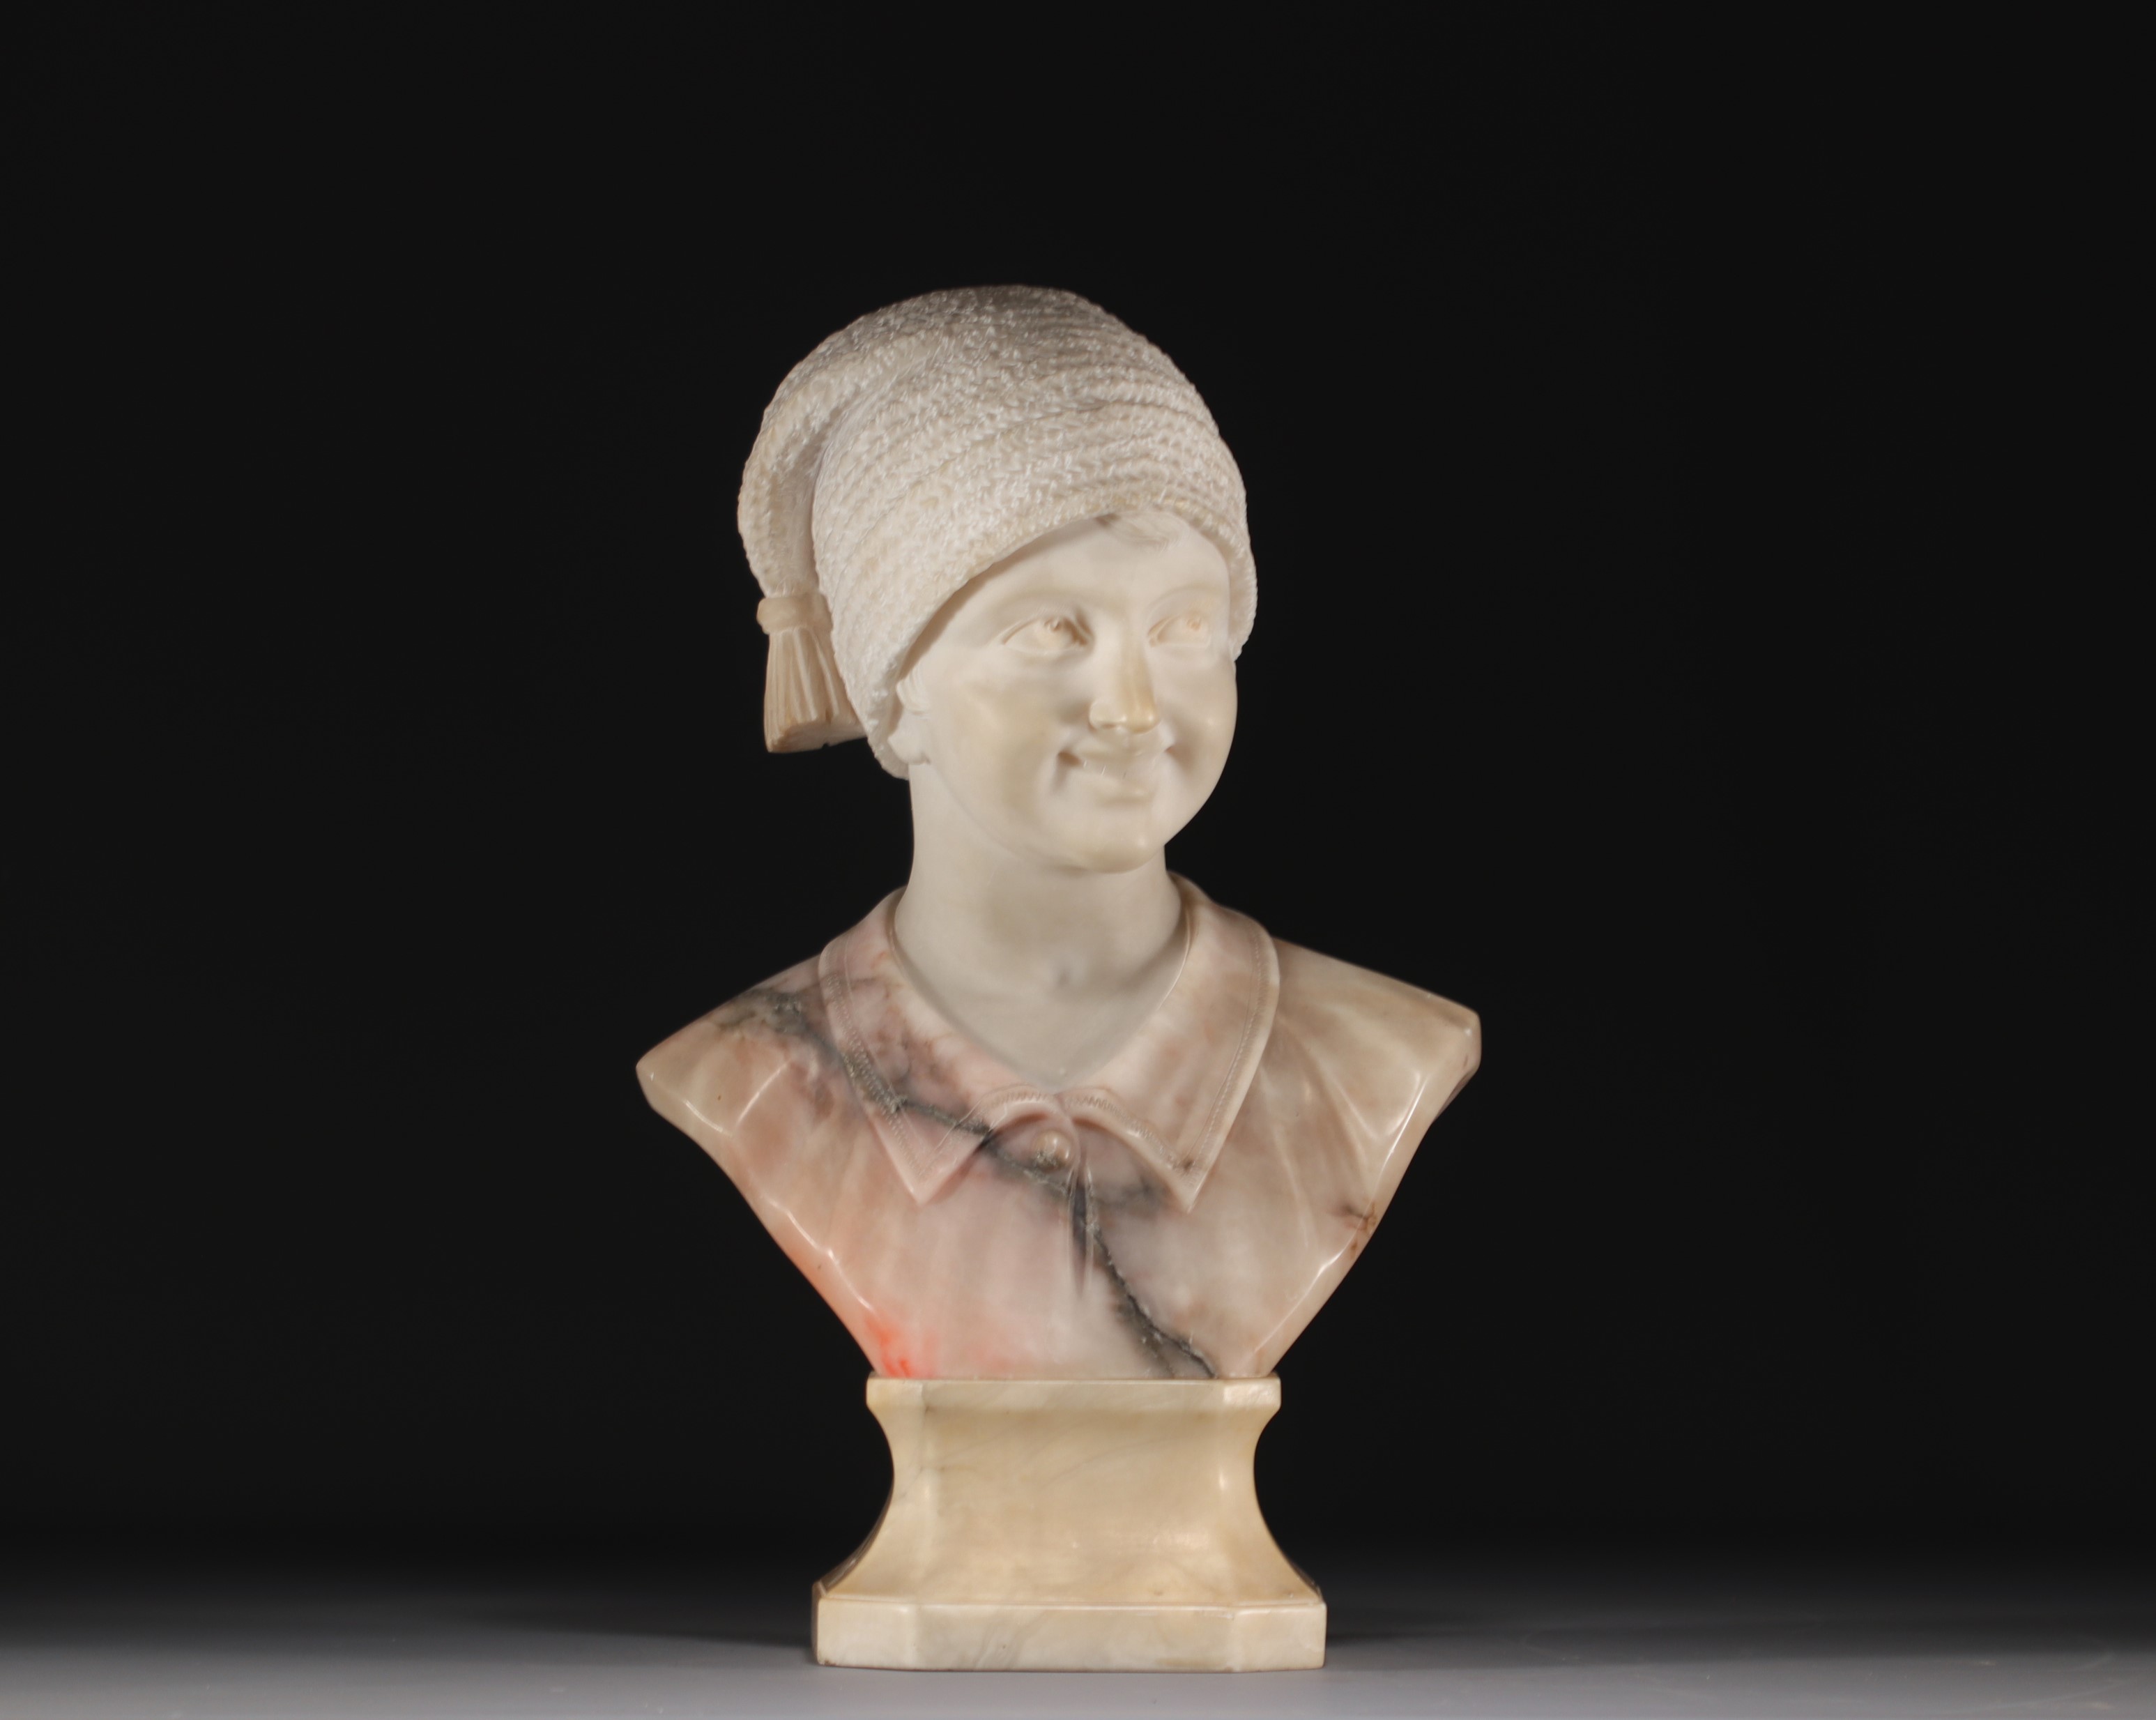 G. PINESCHI - "Young Neapolitan fisherman" Bust in pink alabaster, early 20th century.